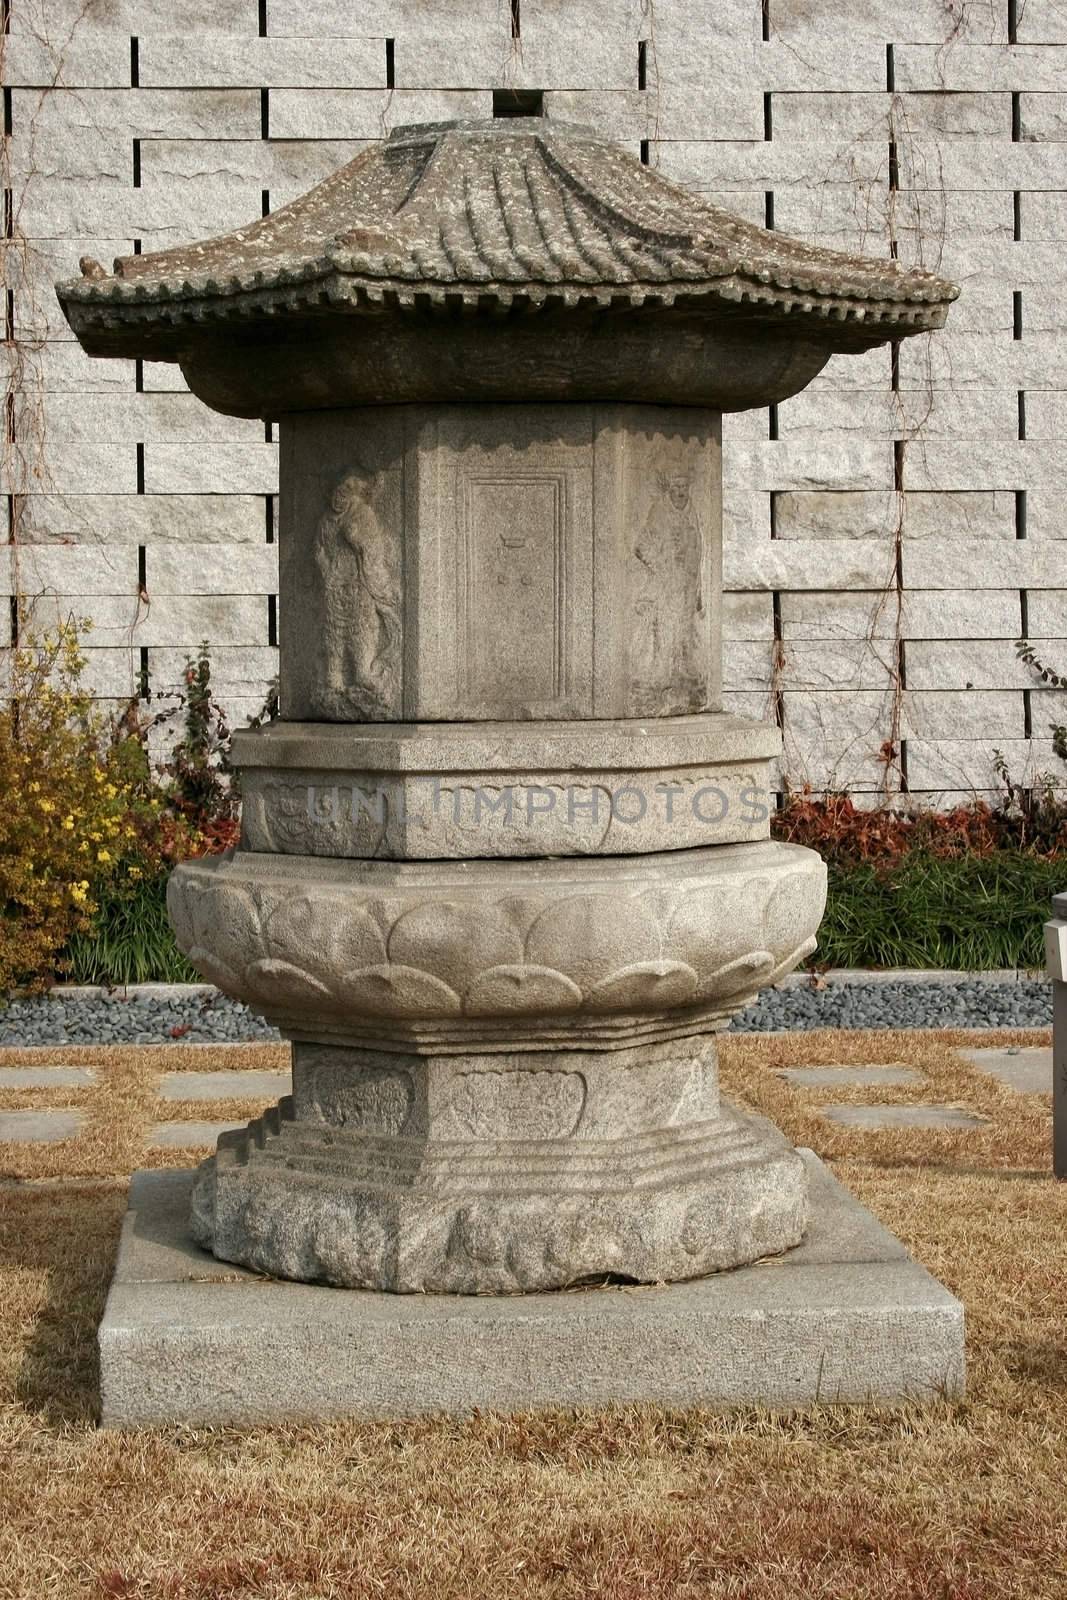 Scene of Korea - a royal catacomb during the time of Joseon dynasty